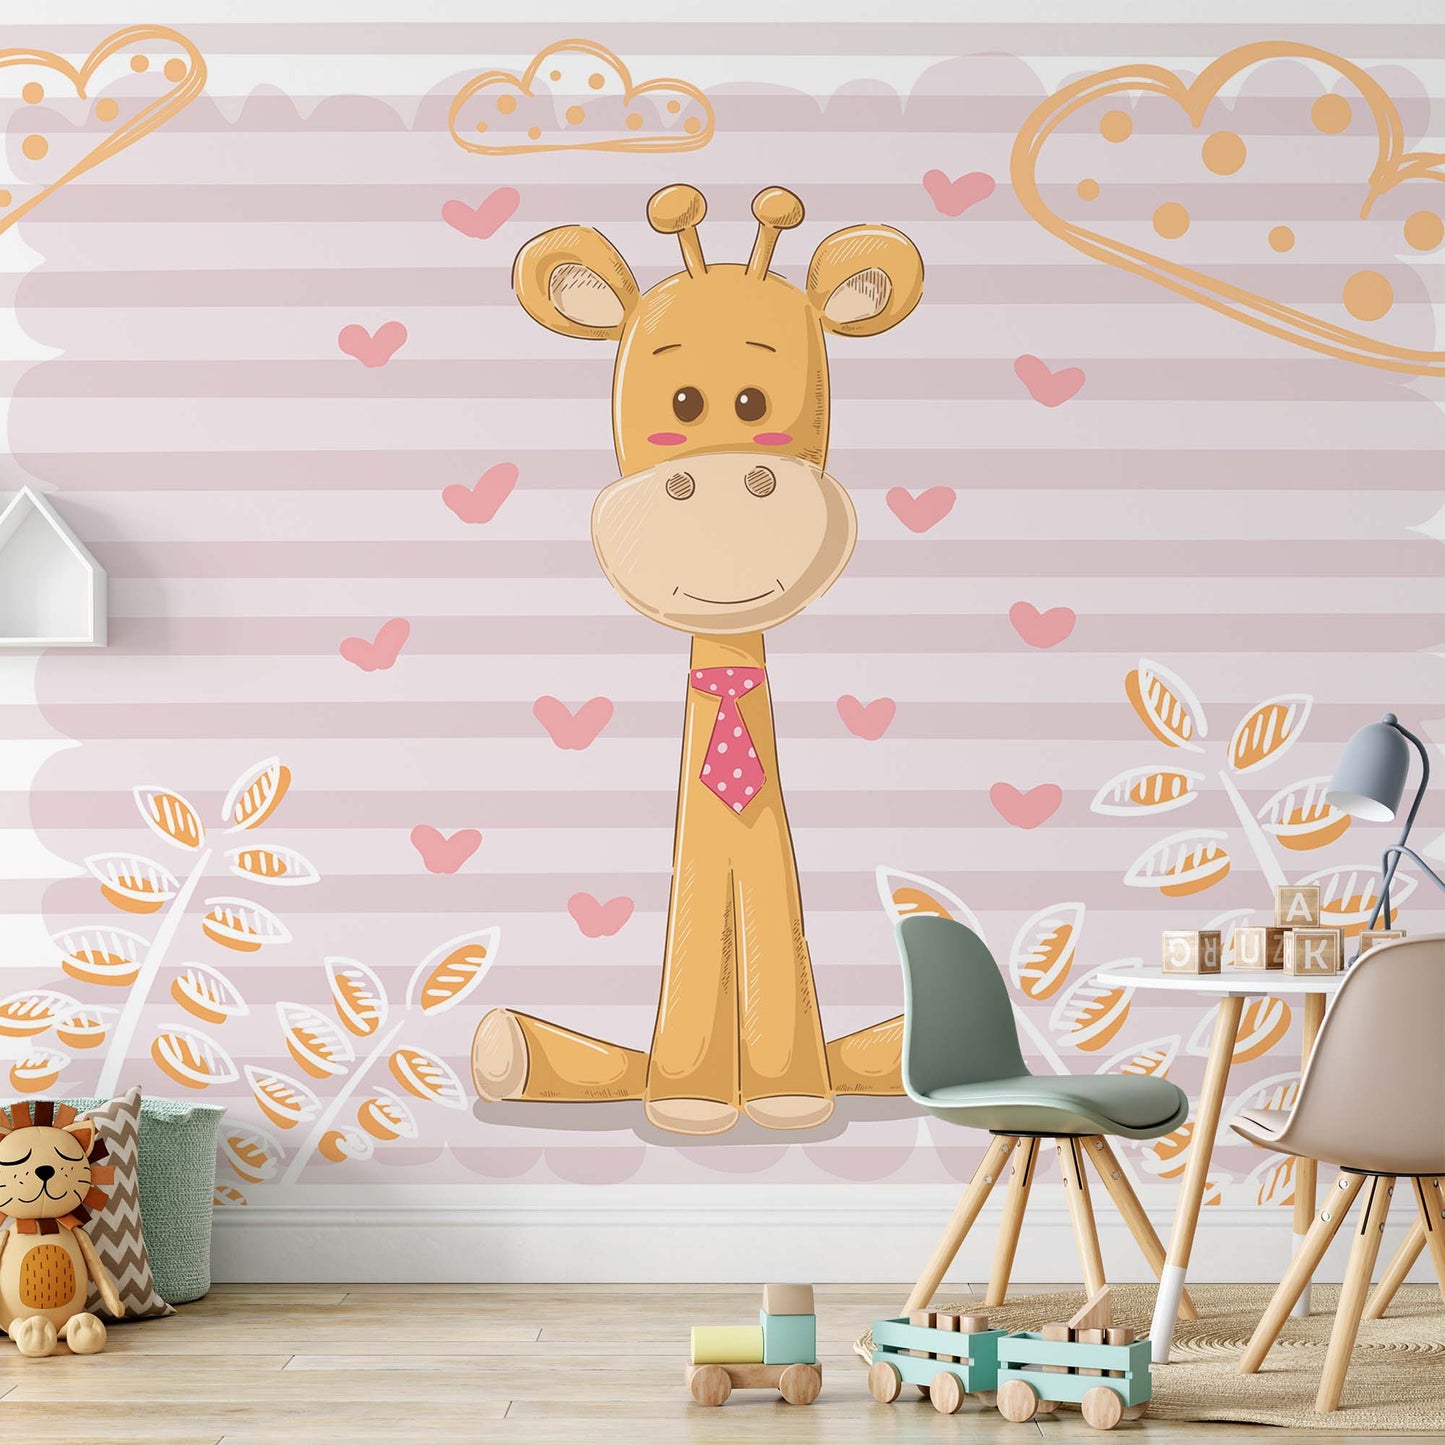 The Cuddlies: Jake and Kirsty Wallpaper - USTAD HOME